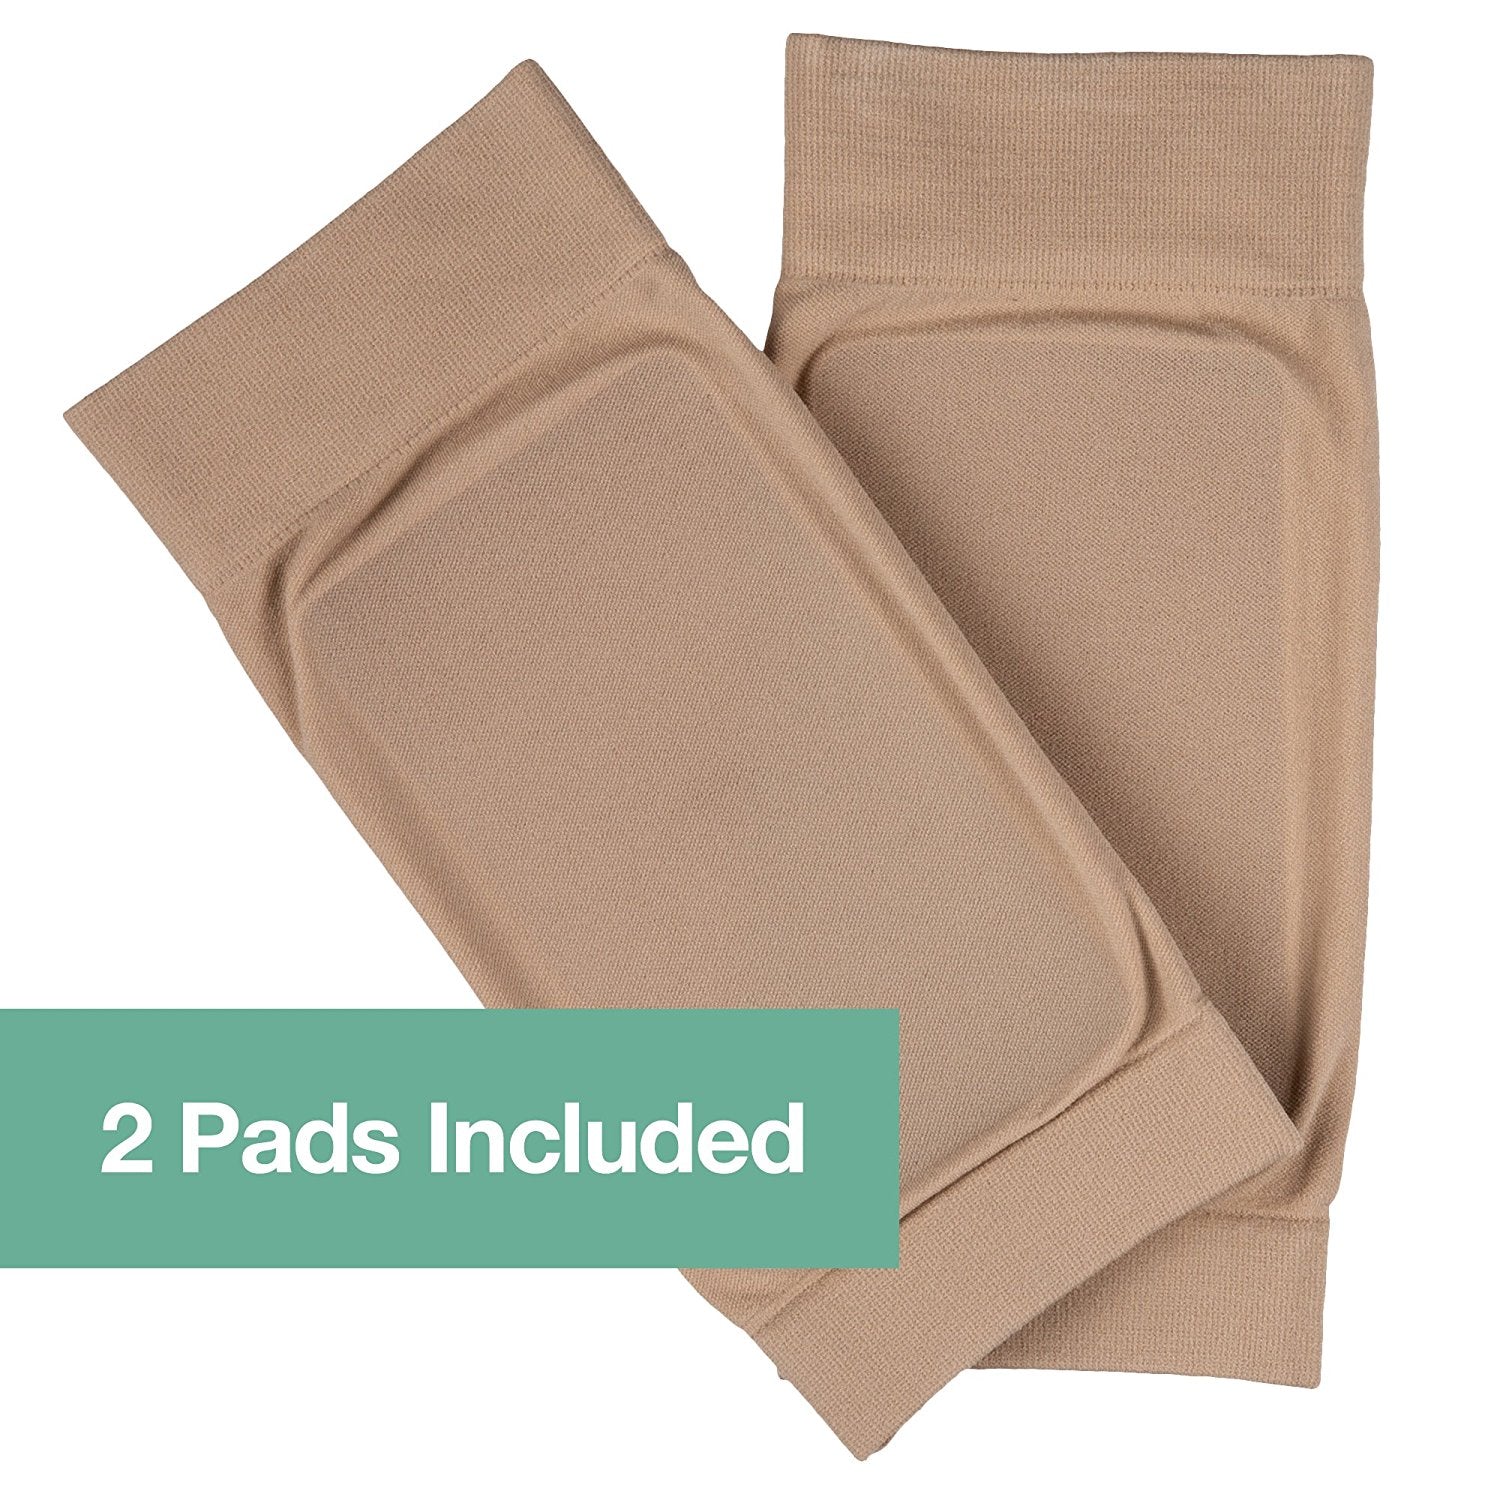 Padded Skate Socks for Lace Bite Protection - 1 Pair - ZenToes